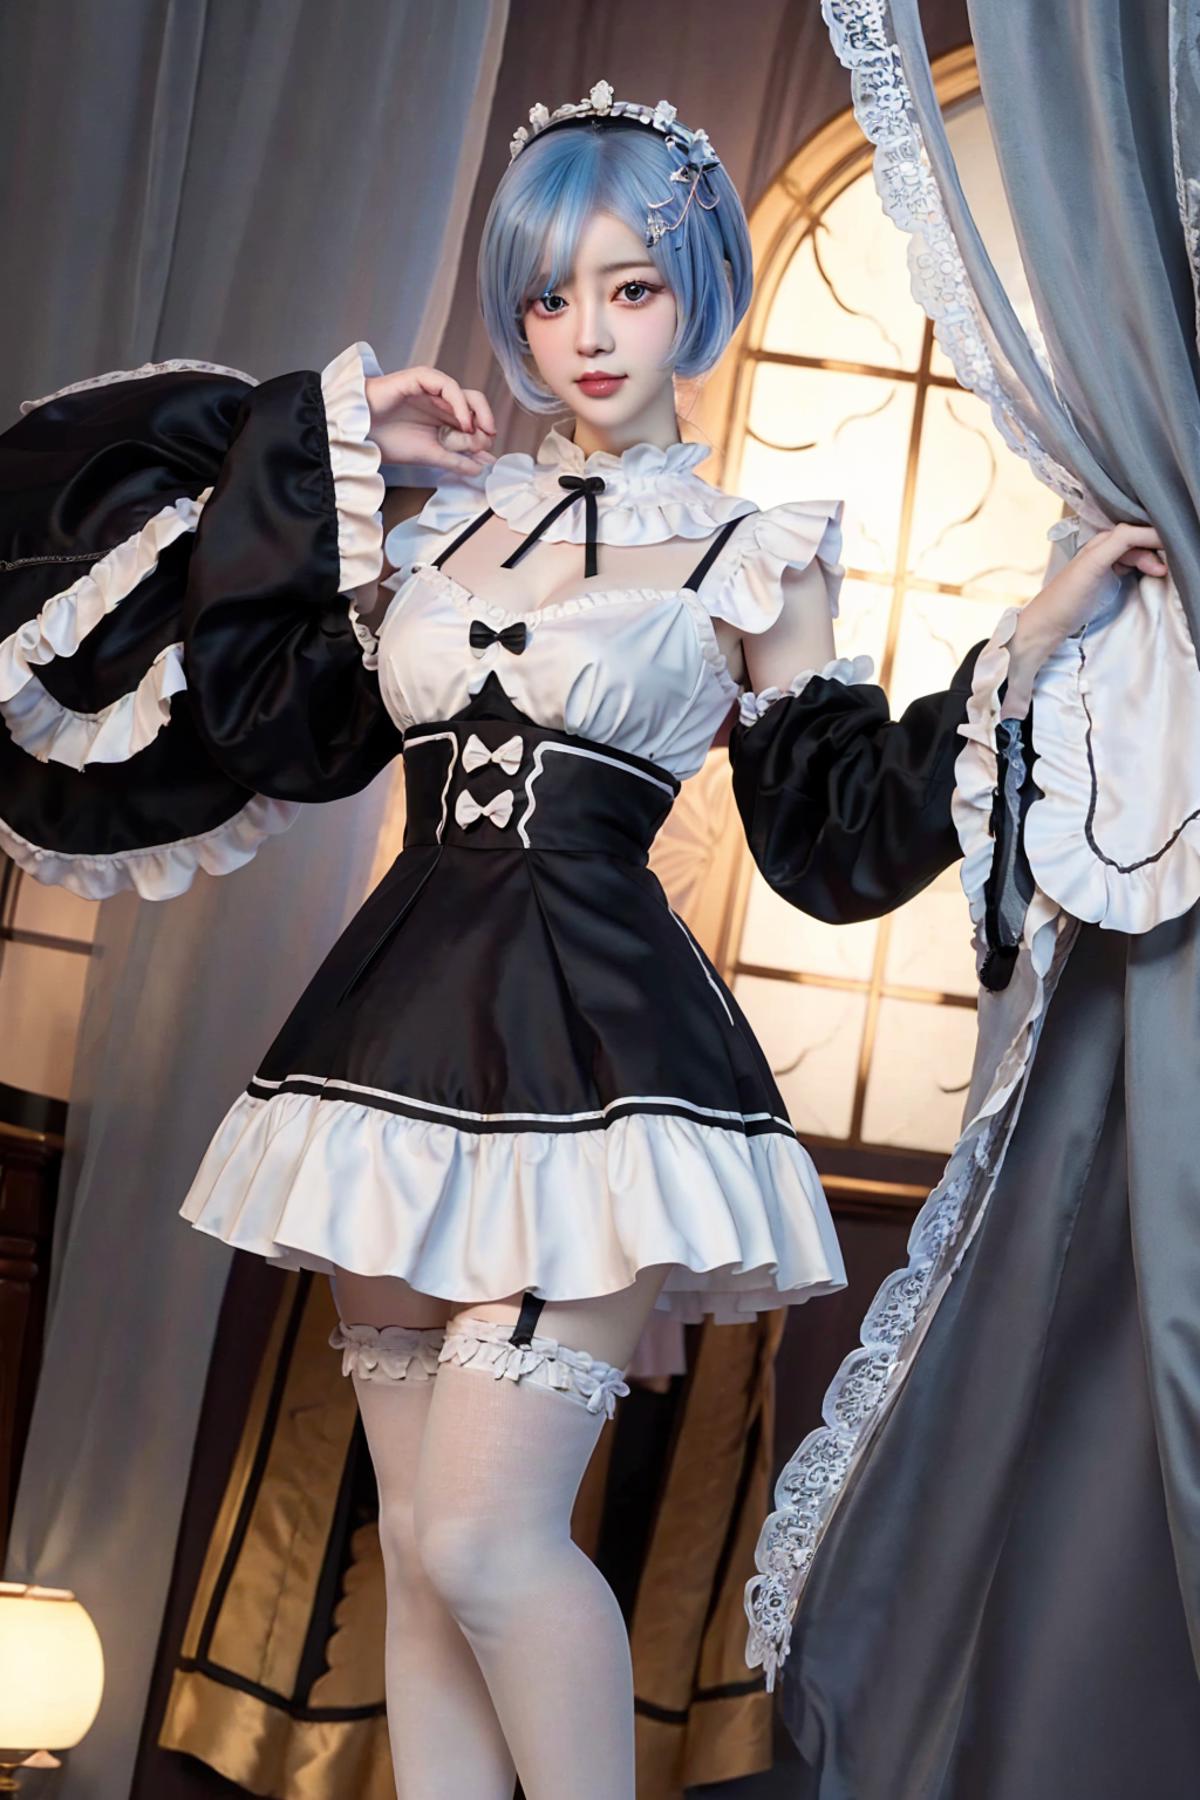 Rem/maid image by AIGC_StaR